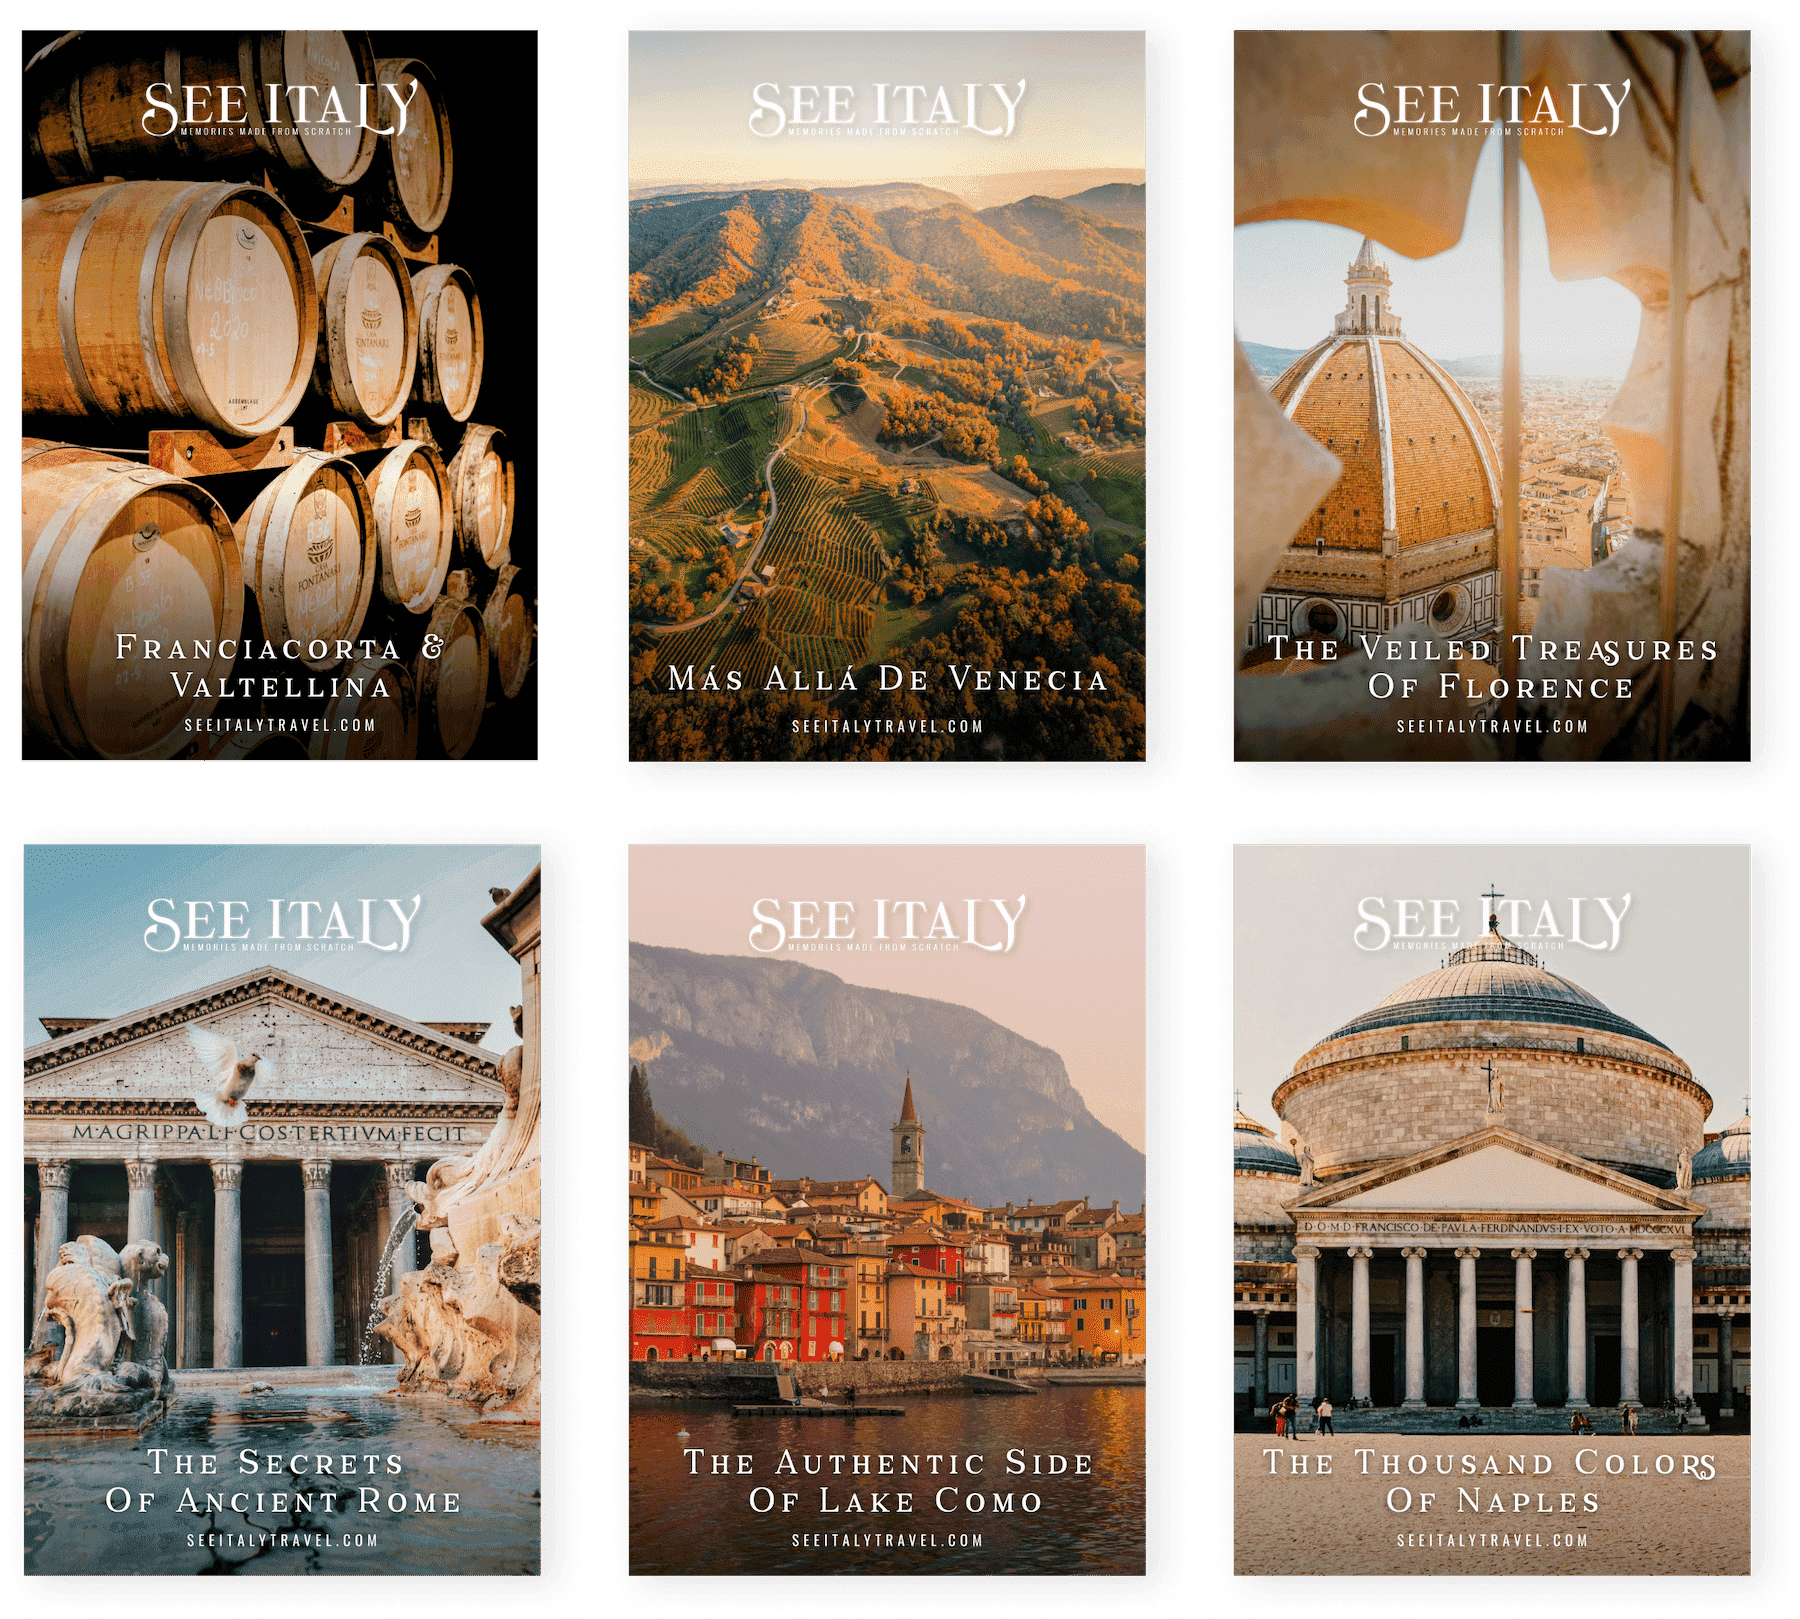 Series of informative posters about Italy. These posters cover various facets of Italian culture, history, and travel